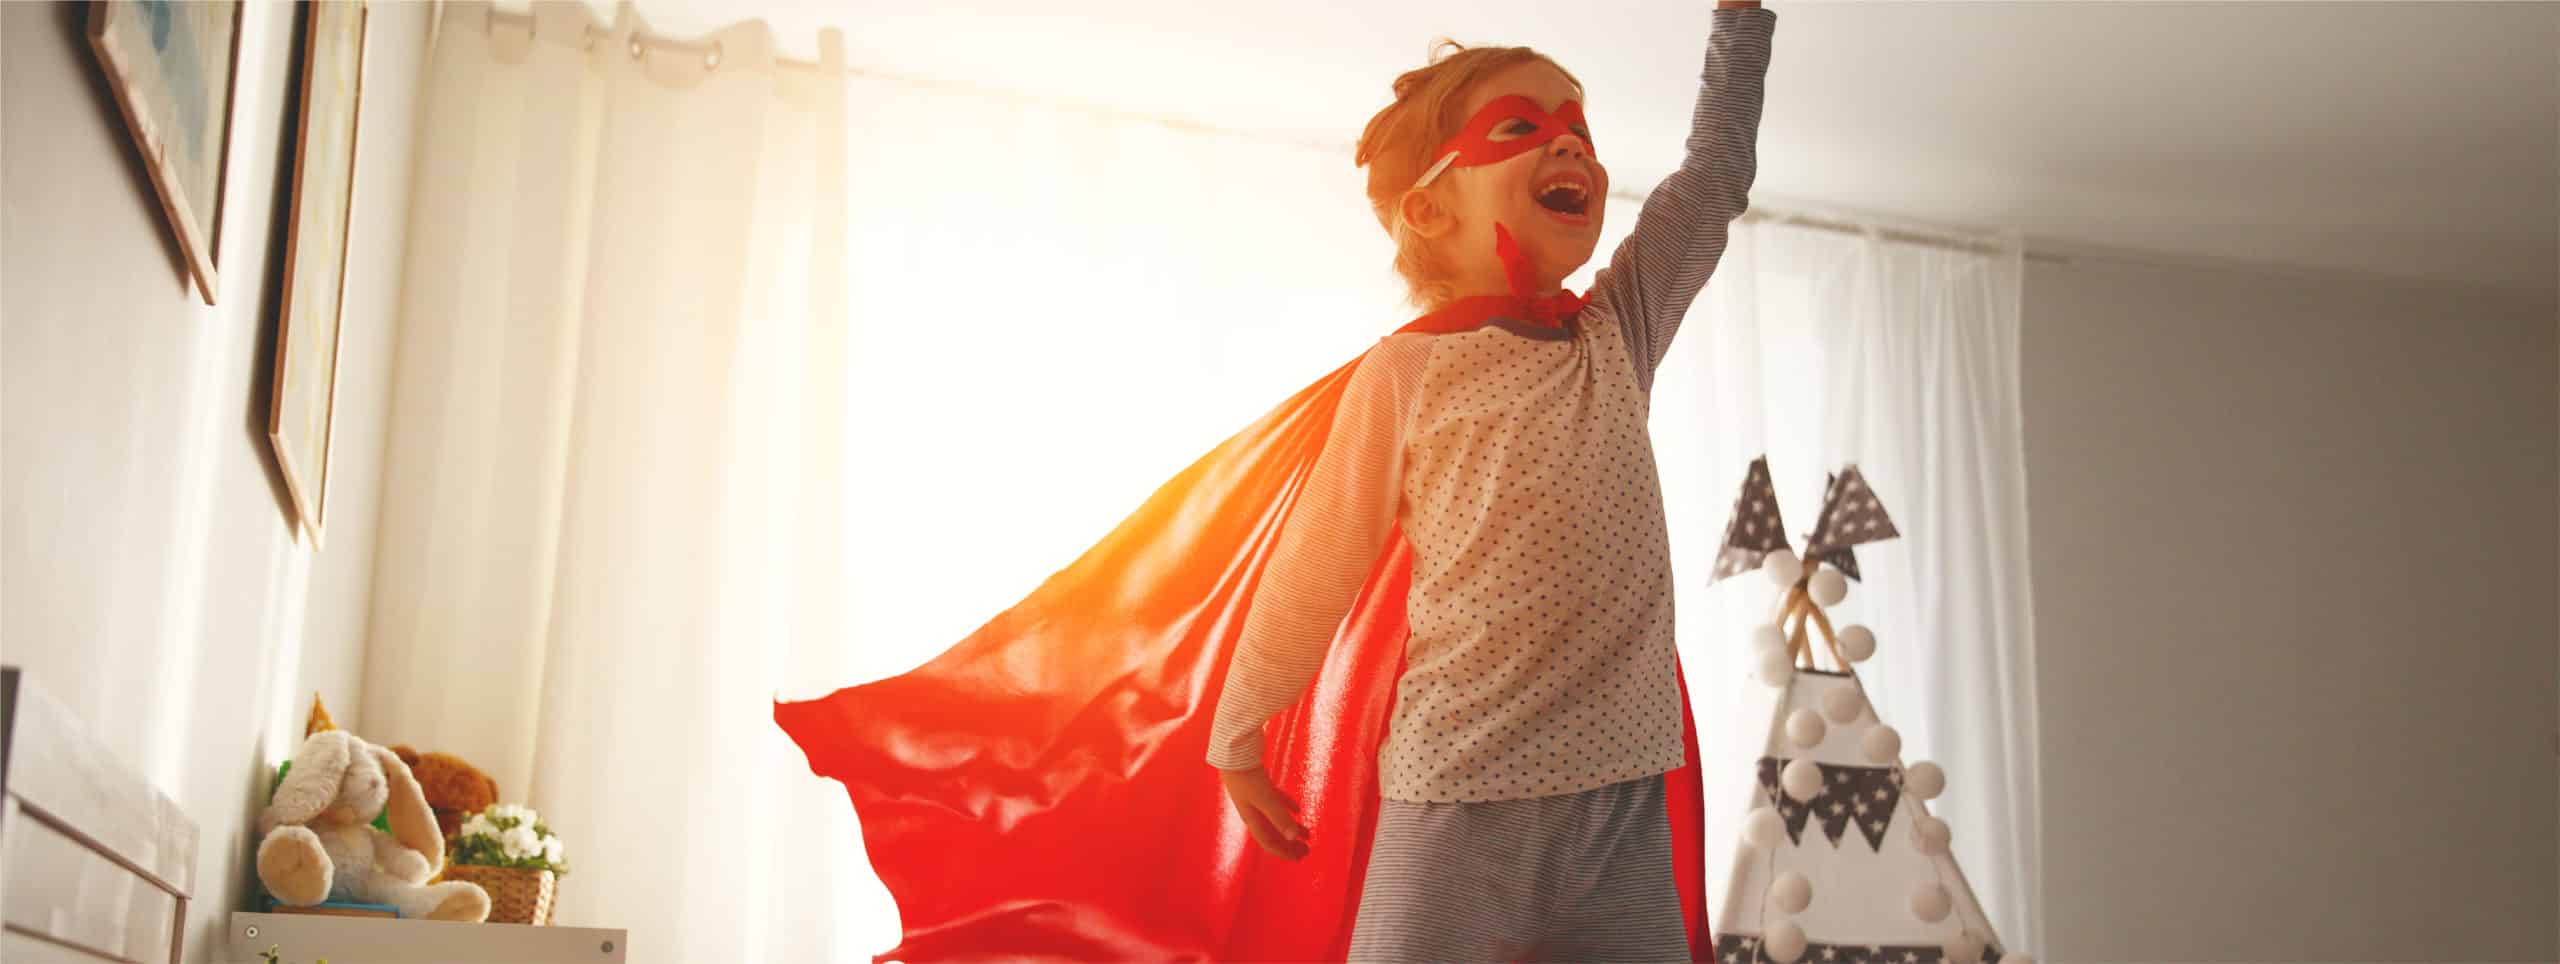 Image of a child dressed like a superhero on PSA Insurance & Financial Services' website